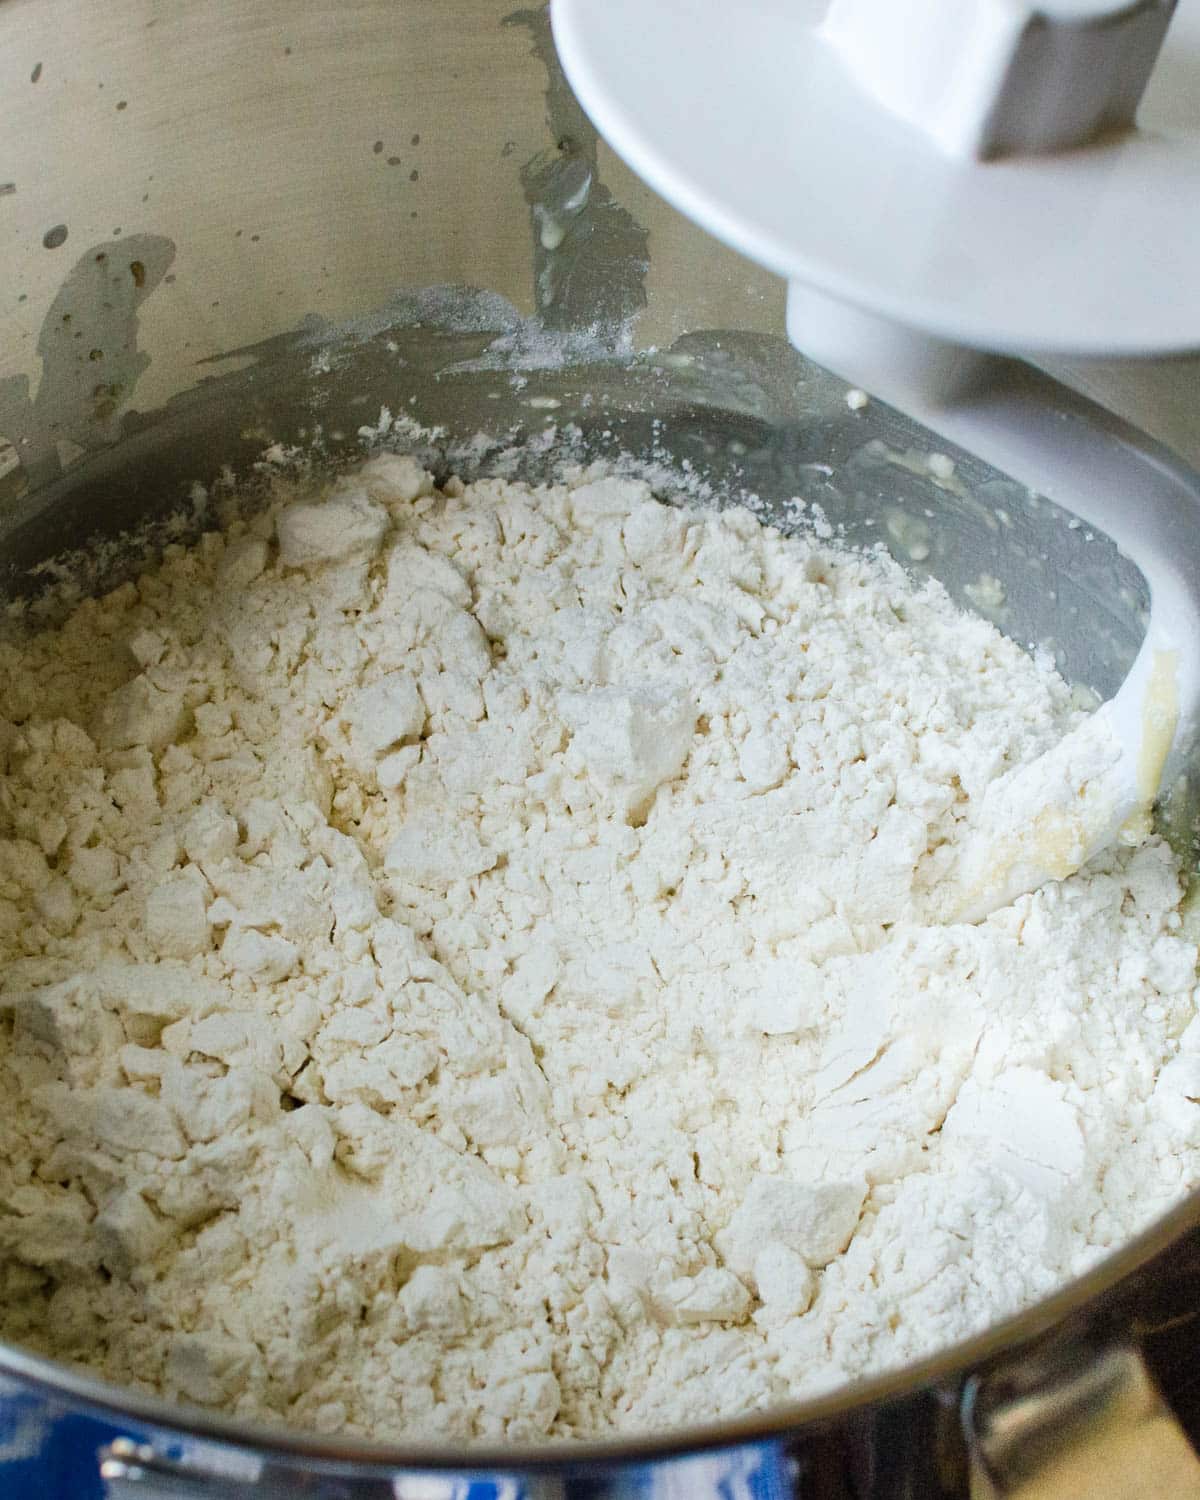 Mixing the flour into the dough with a stand mixer.